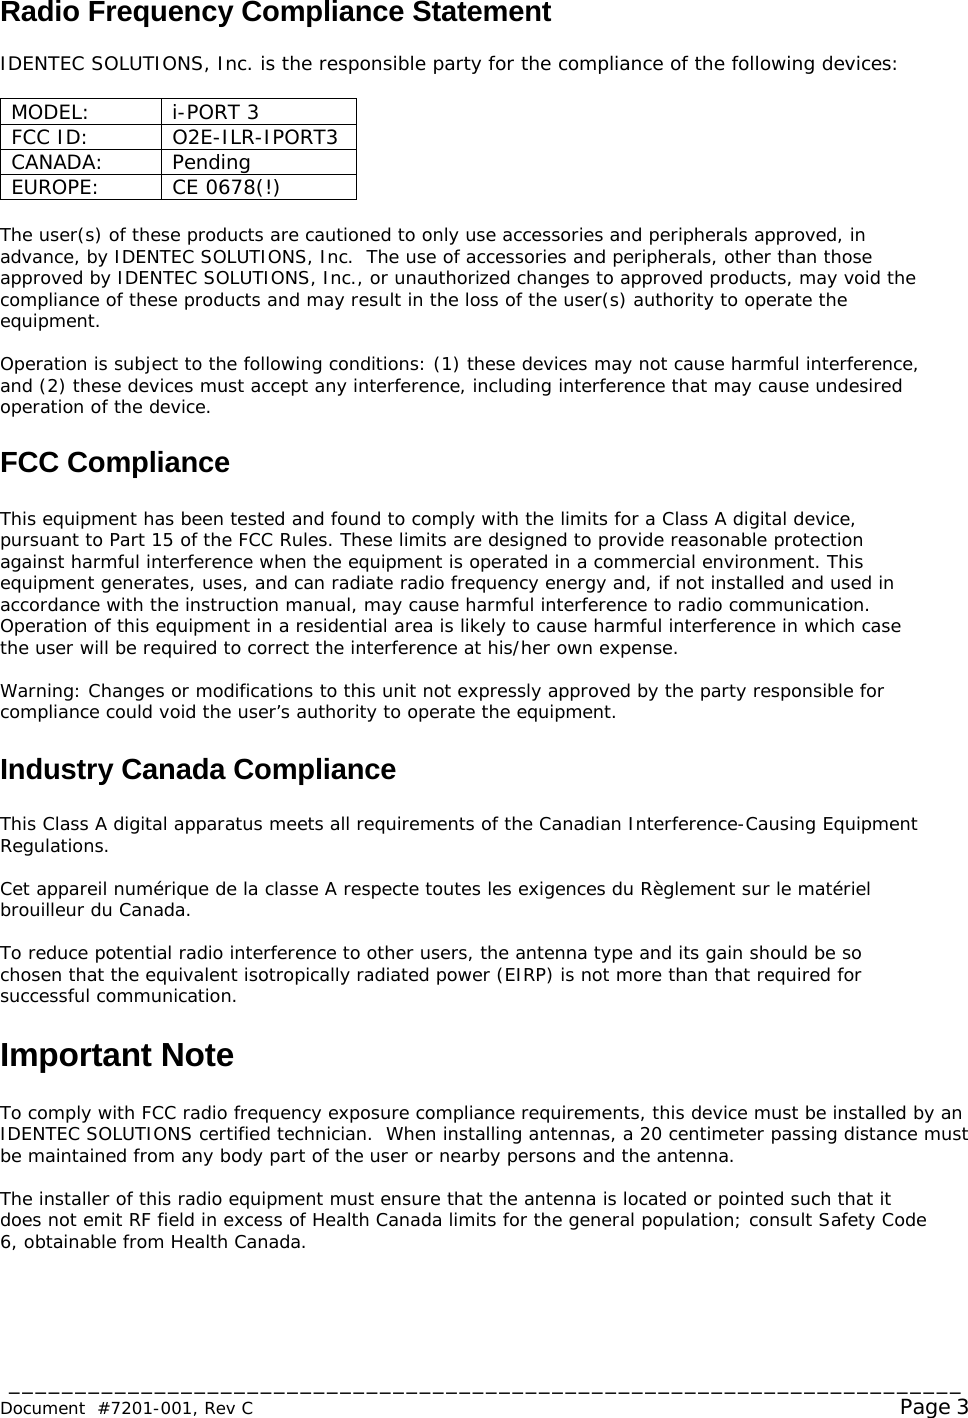 ________________________________________________________________________  Document  #7201-001, Rev C  Page 3 Radio Frequency Compliance Statement  IDENTEC SOLUTIONS, Inc. is the responsible party for the compliance of the following devices:  MODEL: i-PORT 3 FCC ID:  O2E-ILR-IPORT3 CANADA: Pending EUROPE: CE 0678(!)  The user(s) of these products are cautioned to only use accessories and peripherals approved, in advance, by IDENTEC SOLUTIONS, Inc.  The use of accessories and peripherals, other than those approved by IDENTEC SOLUTIONS, Inc., or unauthorized changes to approved products, may void the compliance of these products and may result in the loss of the user(s) authority to operate the equipment.  Operation is subject to the following conditions: (1) these devices may not cause harmful interference, and (2) these devices must accept any interference, including interference that may cause undesired operation of the device.  FCC Compliance  This equipment has been tested and found to comply with the limits for a Class A digital device, pursuant to Part 15 of the FCC Rules. These limits are designed to provide reasonable protection against harmful interference when the equipment is operated in a commercial environment. This equipment generates, uses, and can radiate radio frequency energy and, if not installed and used in accordance with the instruction manual, may cause harmful interference to radio communication. Operation of this equipment in a residential area is likely to cause harmful interference in which case the user will be required to correct the interference at his/her own expense.  Warning: Changes or modifications to this unit not expressly approved by the party responsible for compliance could void the user’s authority to operate the equipment.  Industry Canada Compliance  This Class A digital apparatus meets all requirements of the Canadian Interference-Causing Equipment Regulations.  Cet appareil numérique de la classe A respecte toutes les exigences du Règlement sur le matériel brouilleur du Canada.  To reduce potential radio interference to other users, the antenna type and its gain should be so chosen that the equivalent isotropically radiated power (EIRP) is not more than that required for successful communication.  Important Note  To comply with FCC radio frequency exposure compliance requirements, this device must be installed by an IDENTEC SOLUTIONS certified technician.  When installing antennas, a 20 centimeter passing distance must be maintained from any body part of the user or nearby persons and the antenna.   The installer of this radio equipment must ensure that the antenna is located or pointed such that it does not emit RF field in excess of Health Canada limits for the general population; consult Safety Code 6, obtainable from Health Canada. 